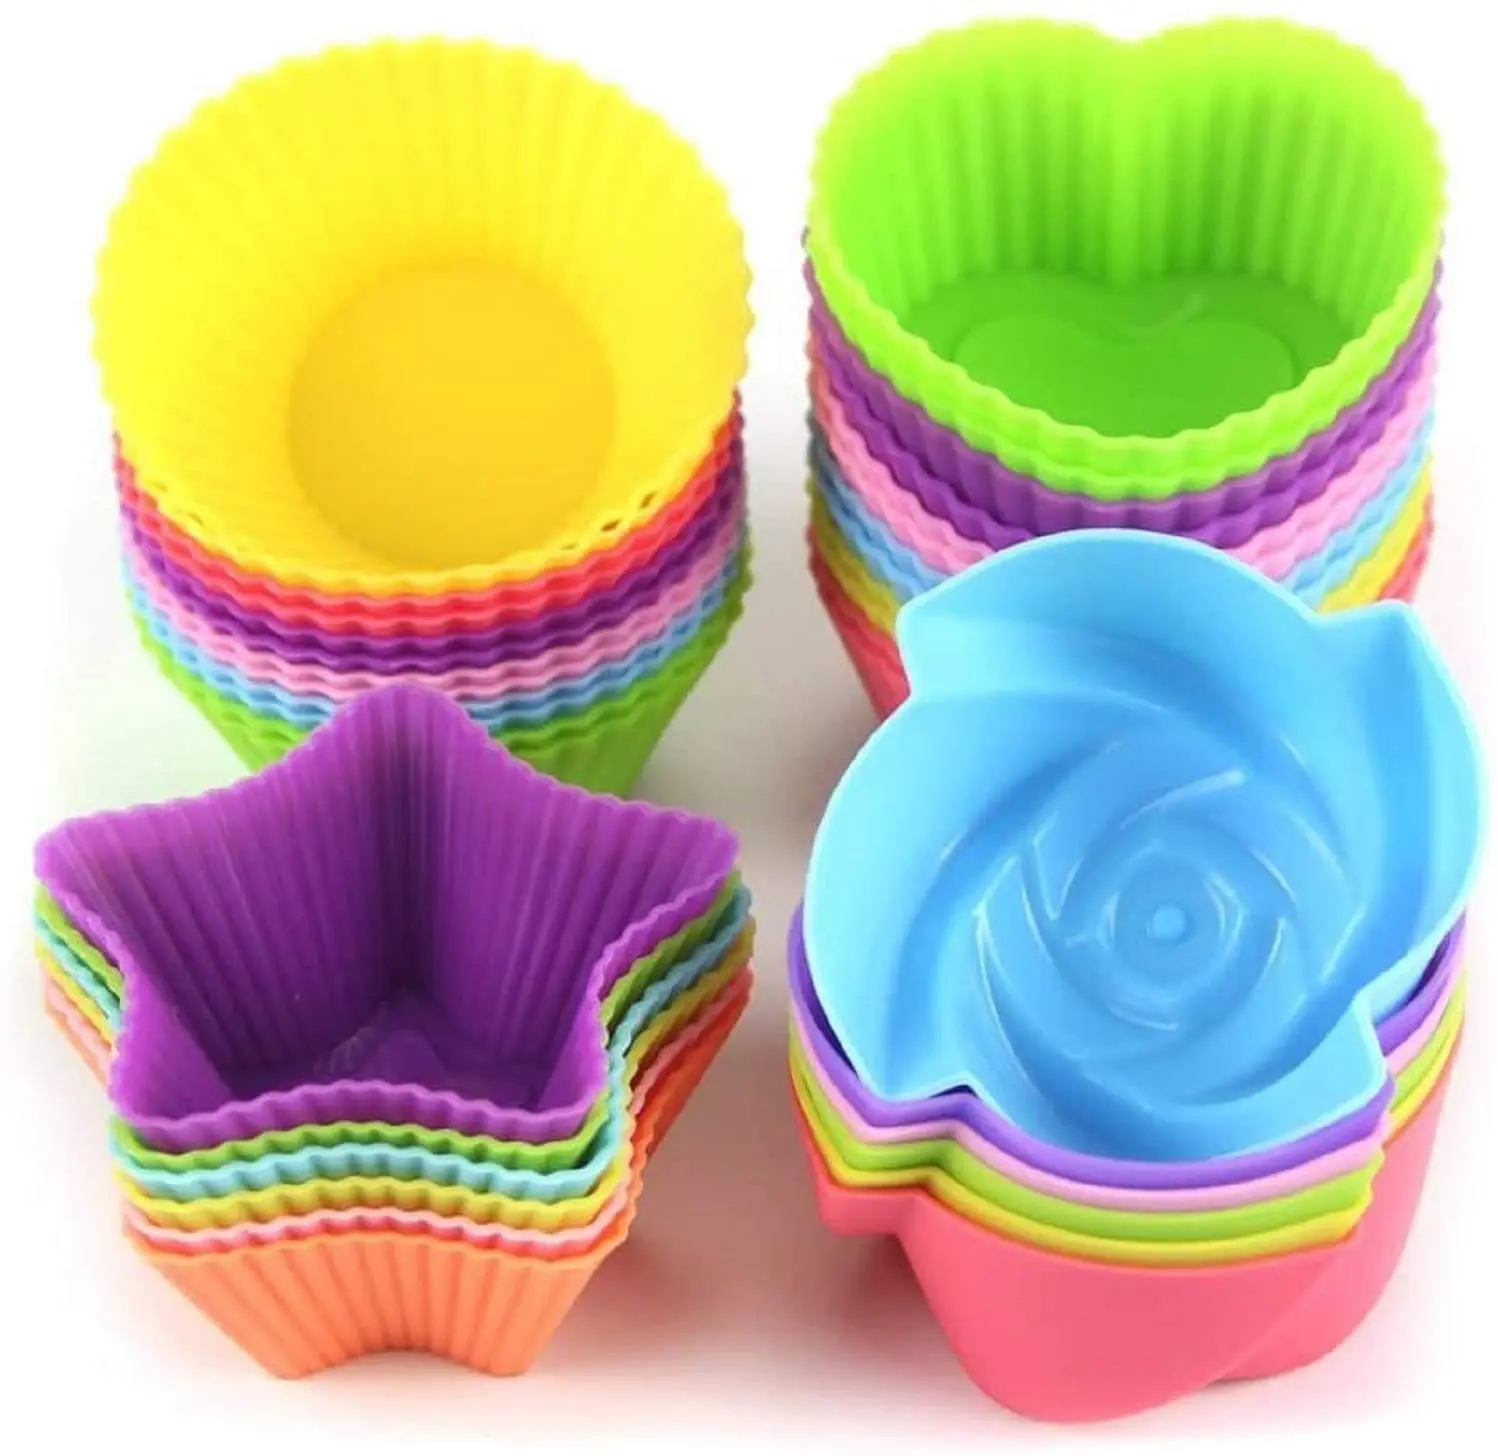 

Silicone Cupcake Liners Reusable Baking Cups Different Shapes Round, Stars,Squre, Heart, Flowers Muffin Molds, Random